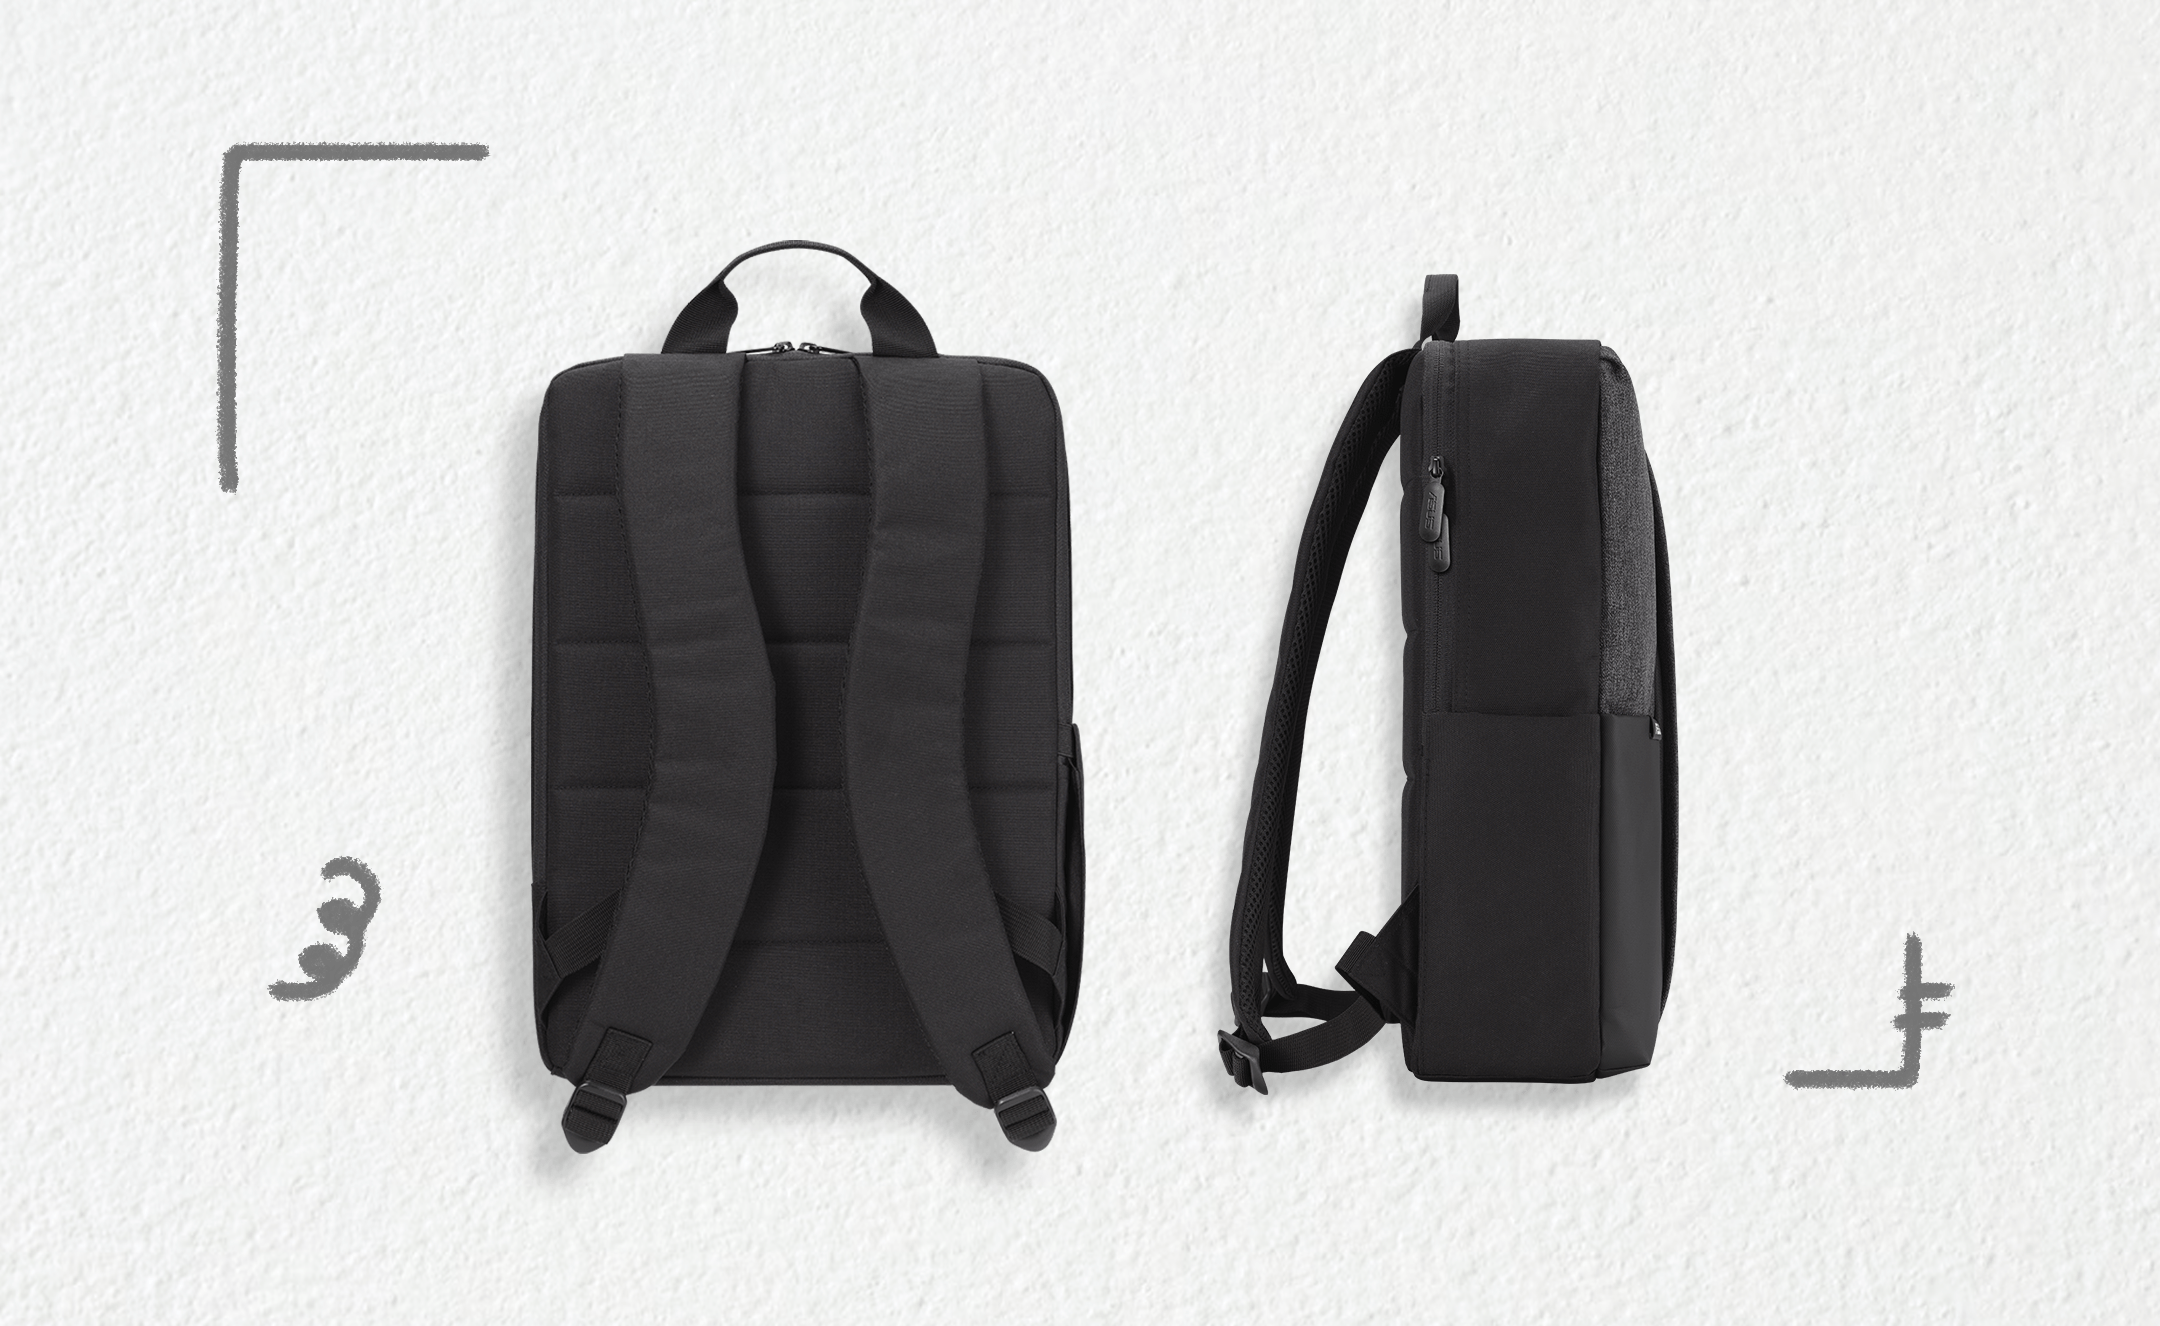 The front and side views of the ASUS AP4600 backpack.